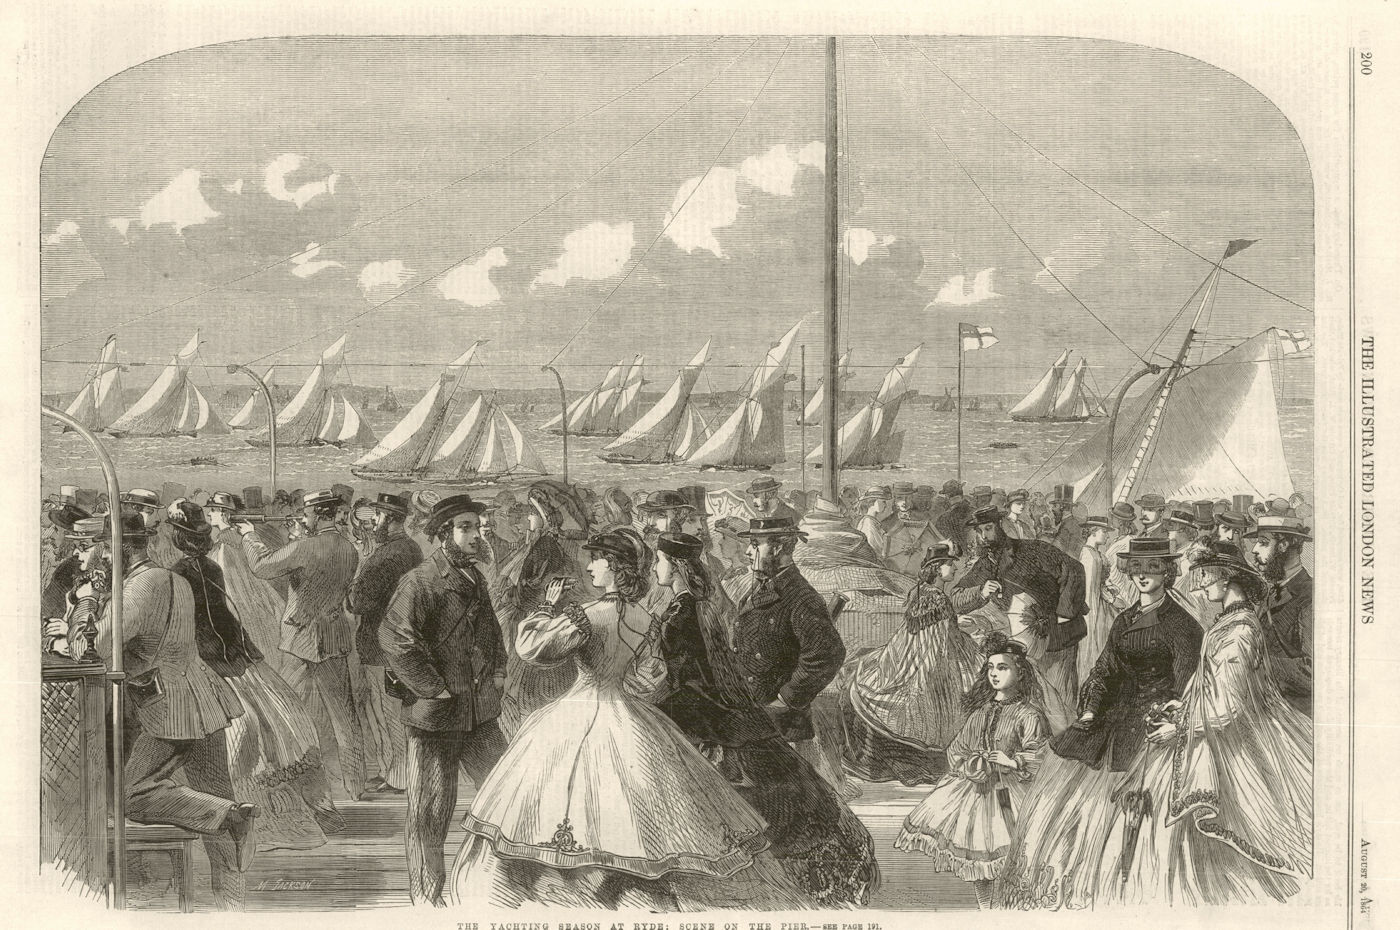 Associate Product The Yachting Season at Ryde: Scene on the Pier. Isle of Wight 1864 old print